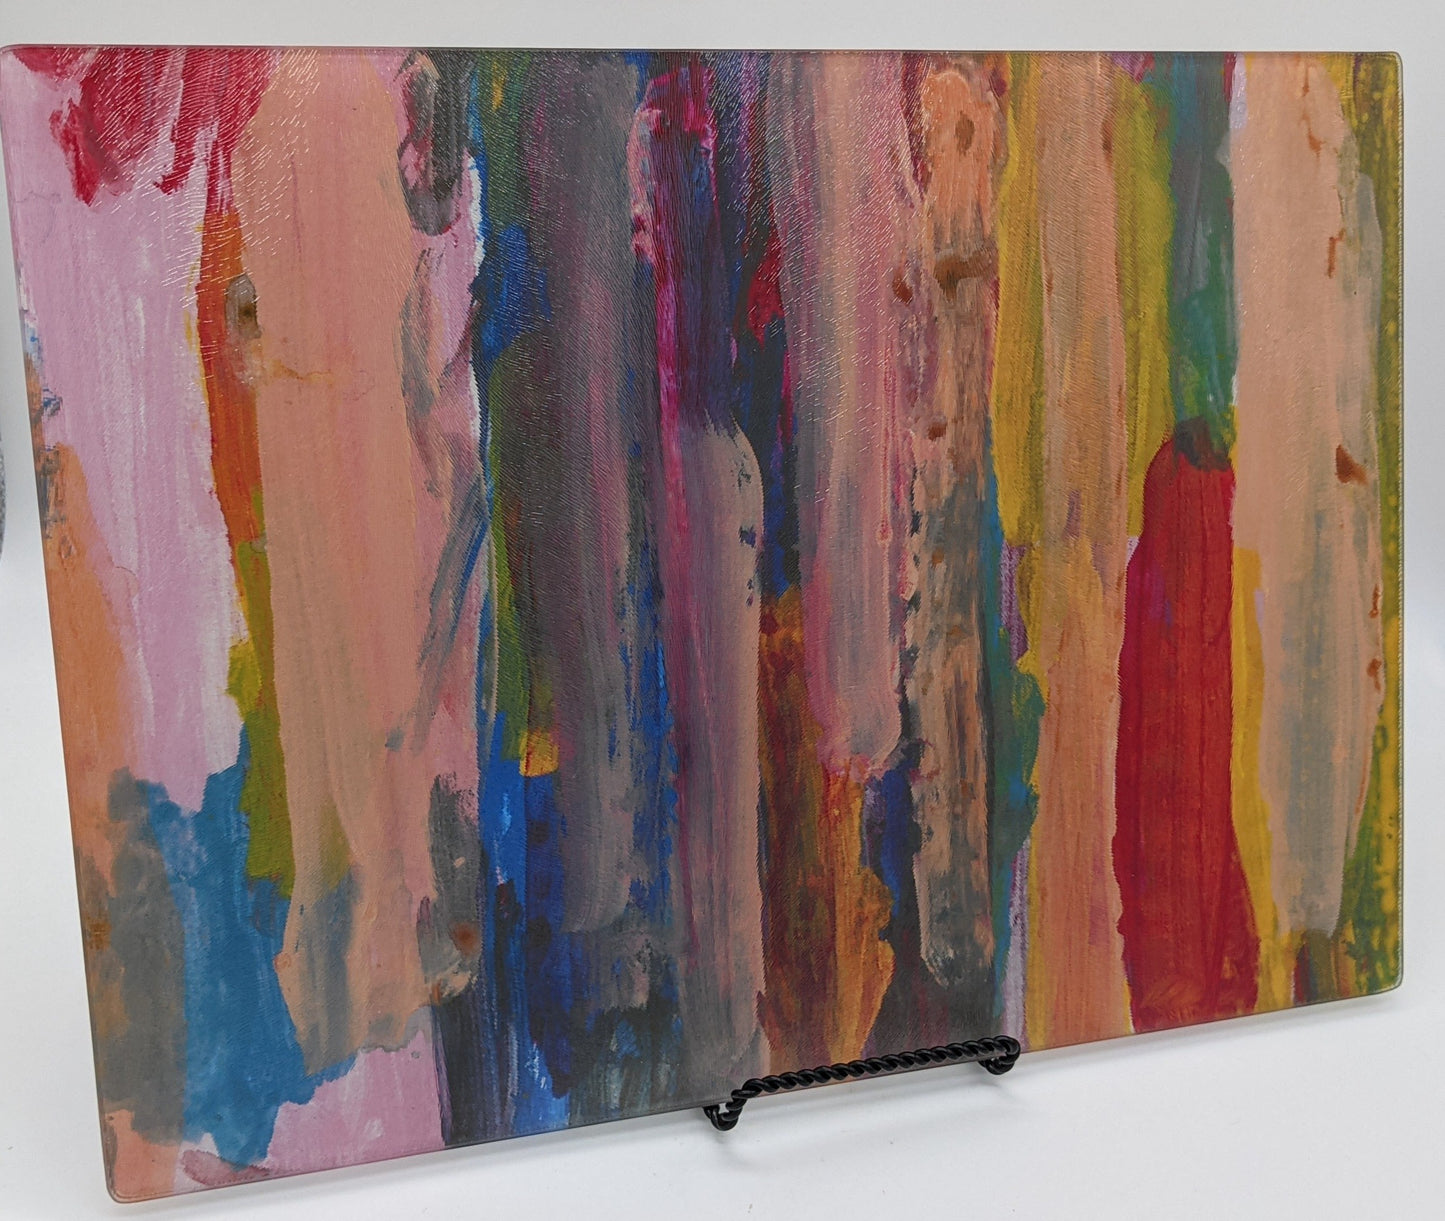 Large Rectangle glass cutting board with the following image of Layers of vertical brushstrokes overlapping. In the center the background is a dark blue, to the left is yellow, and the right is pink. The top layer of brushstrokes are mostly a pale pink